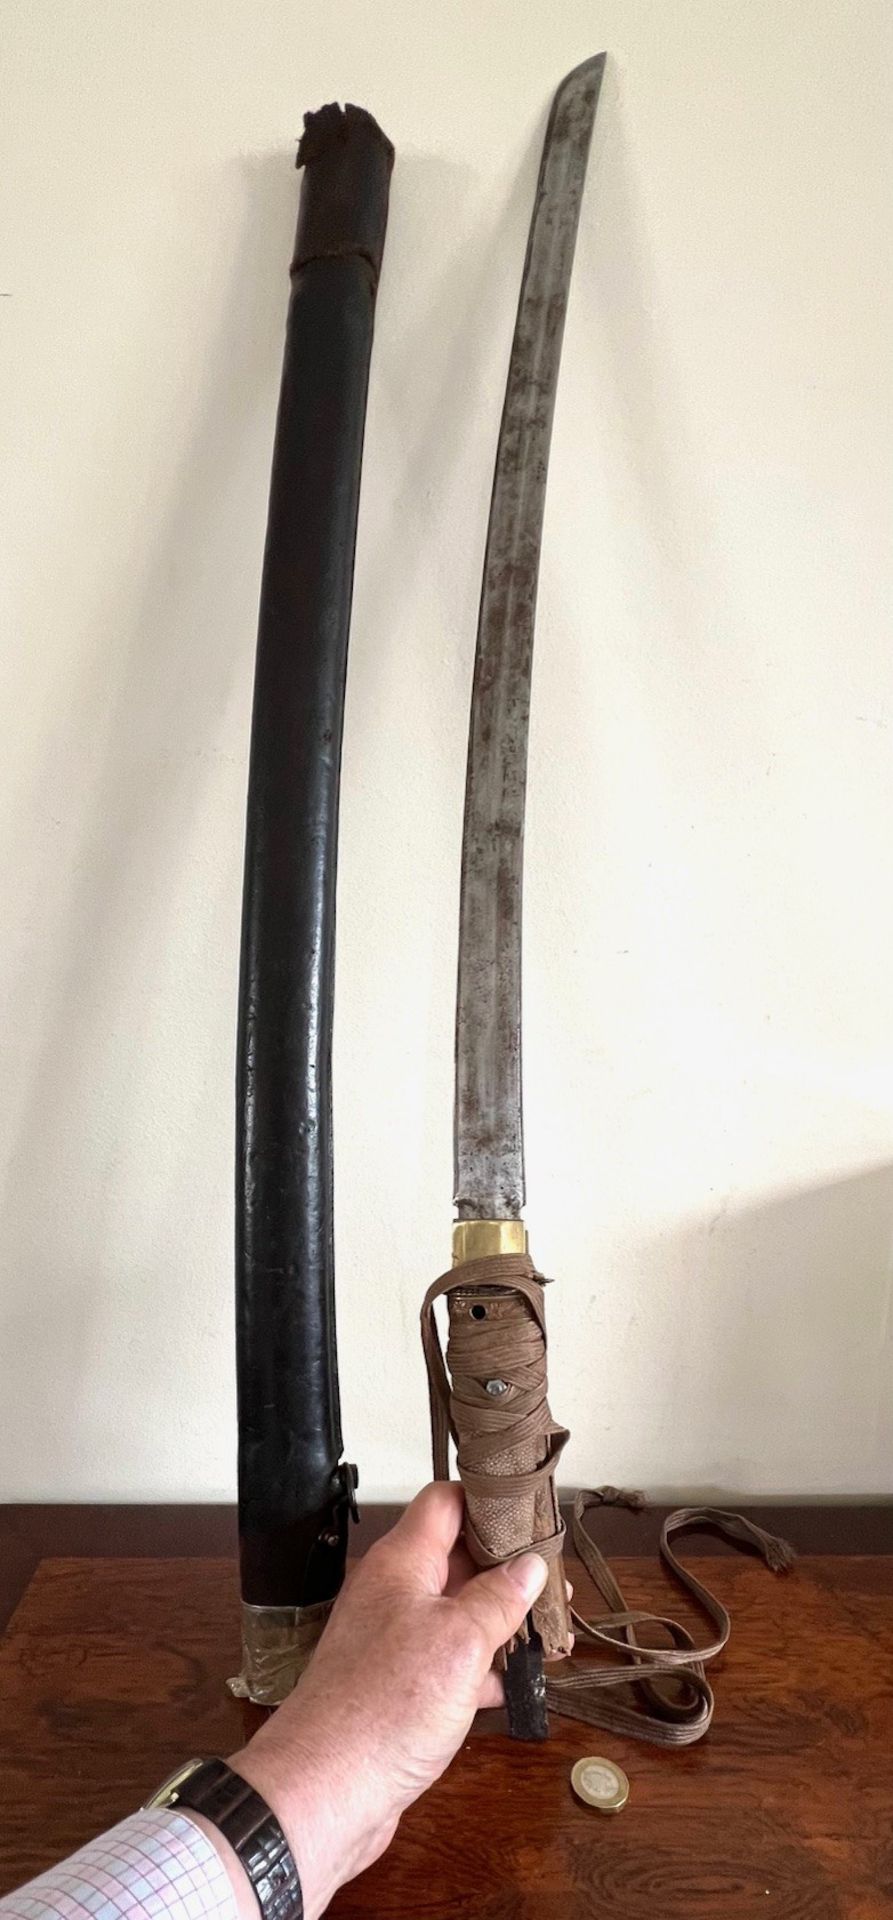 JAPANESE SWORD AND SCABBARD IN DISTRESSED CONDITION, BLADE LENGTH APPROX 60cm, TOTAL LENGTH APPROX